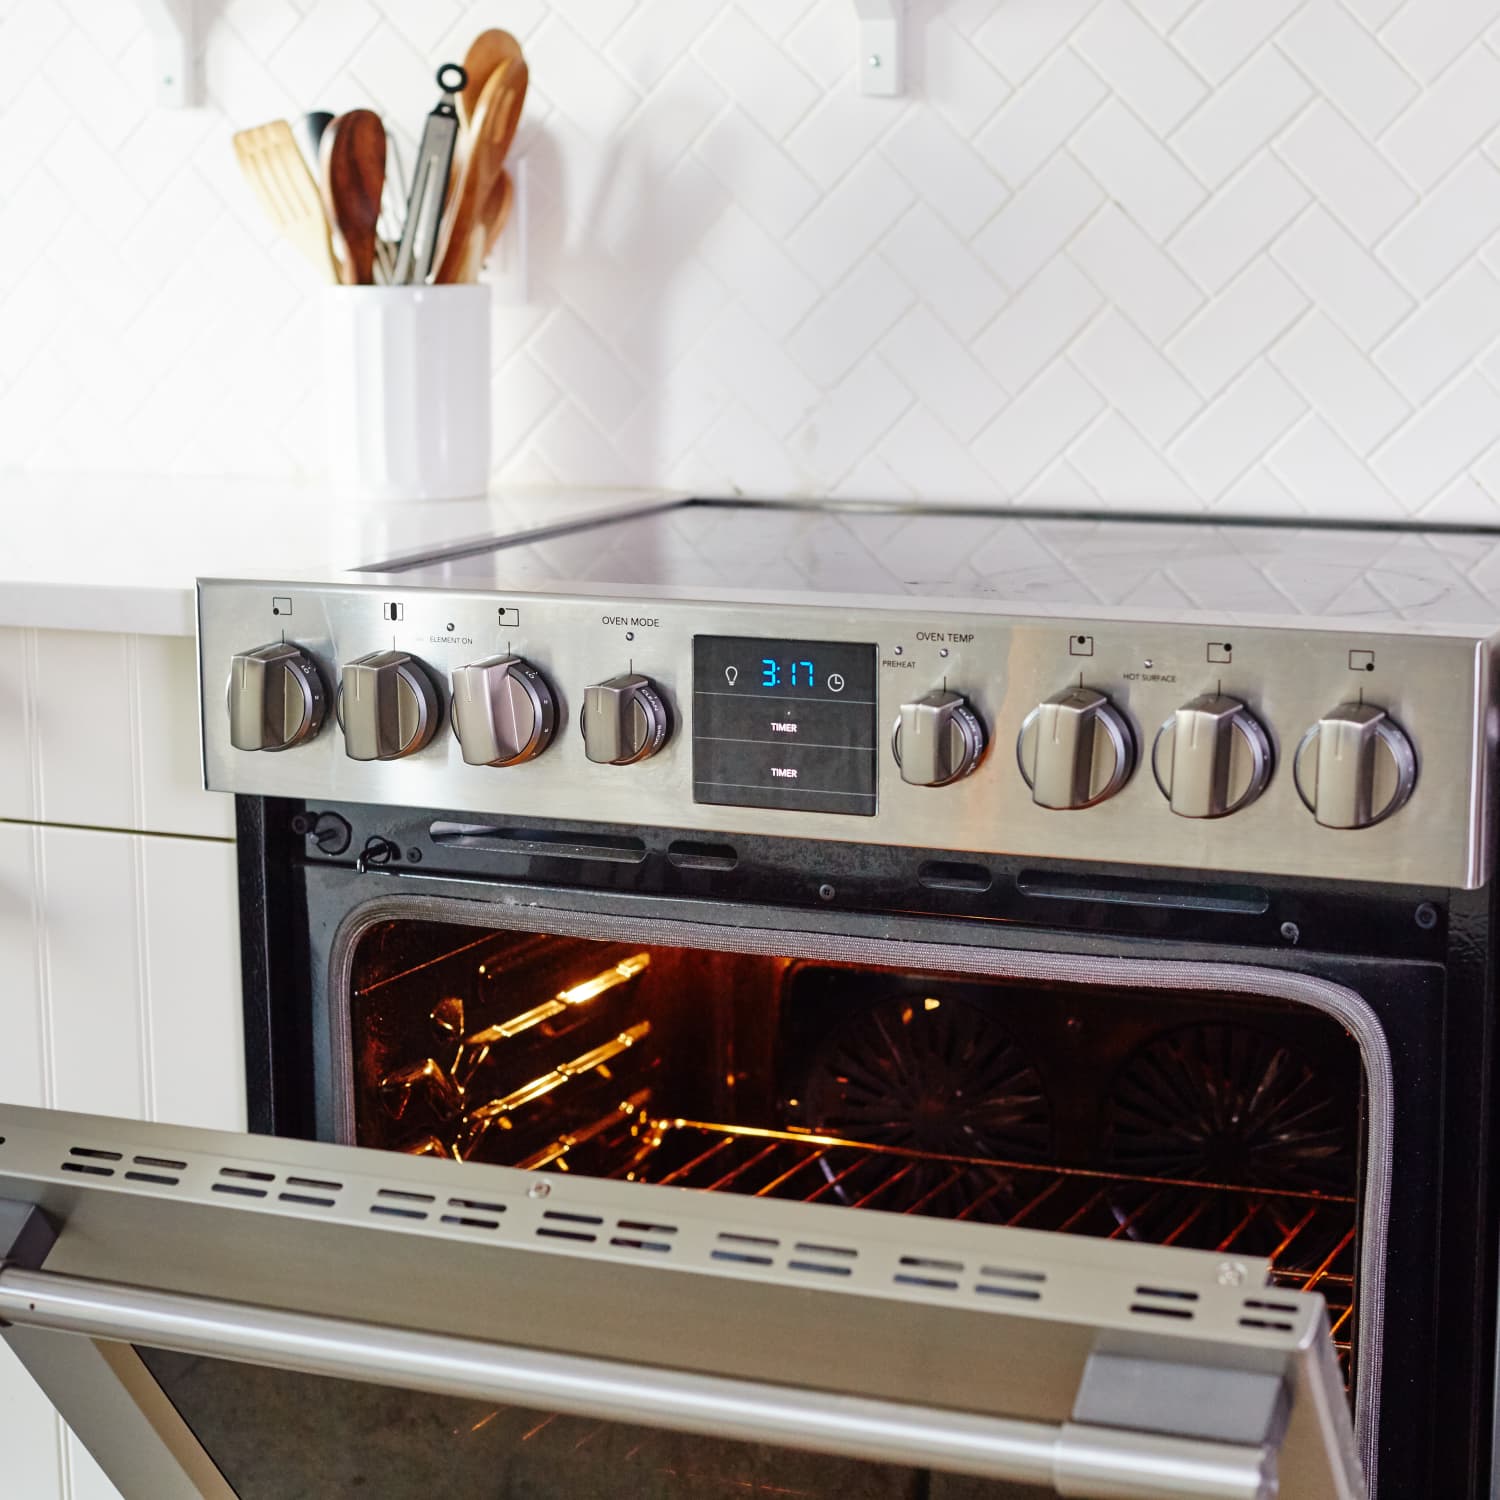 How To Fix The Error Code F21 For Whirlpool Oven & Range